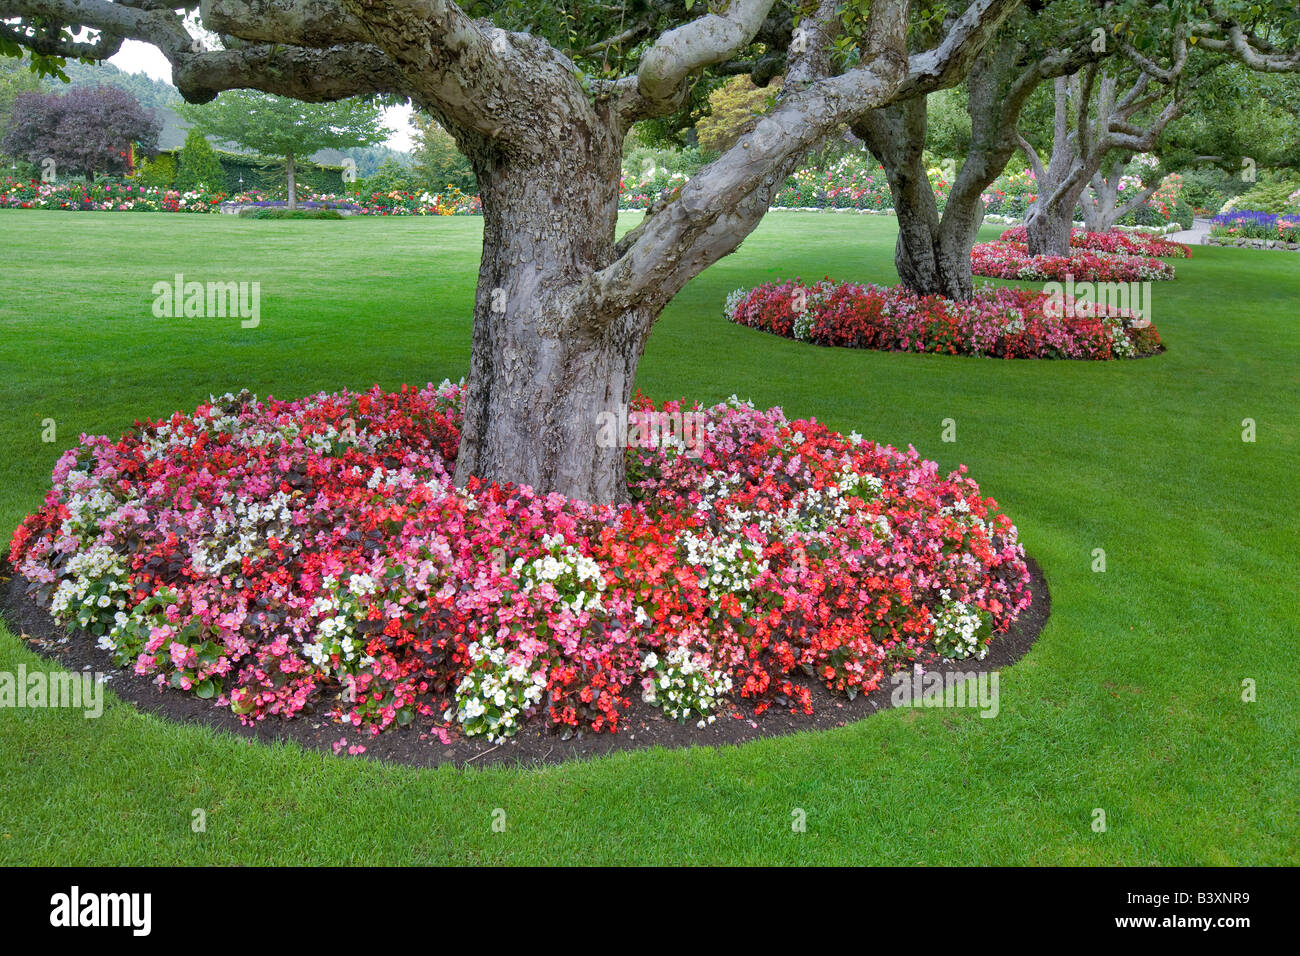 Begonia flowers aroung base of apple trees Butchart Gardens B C Canada Stock Photo